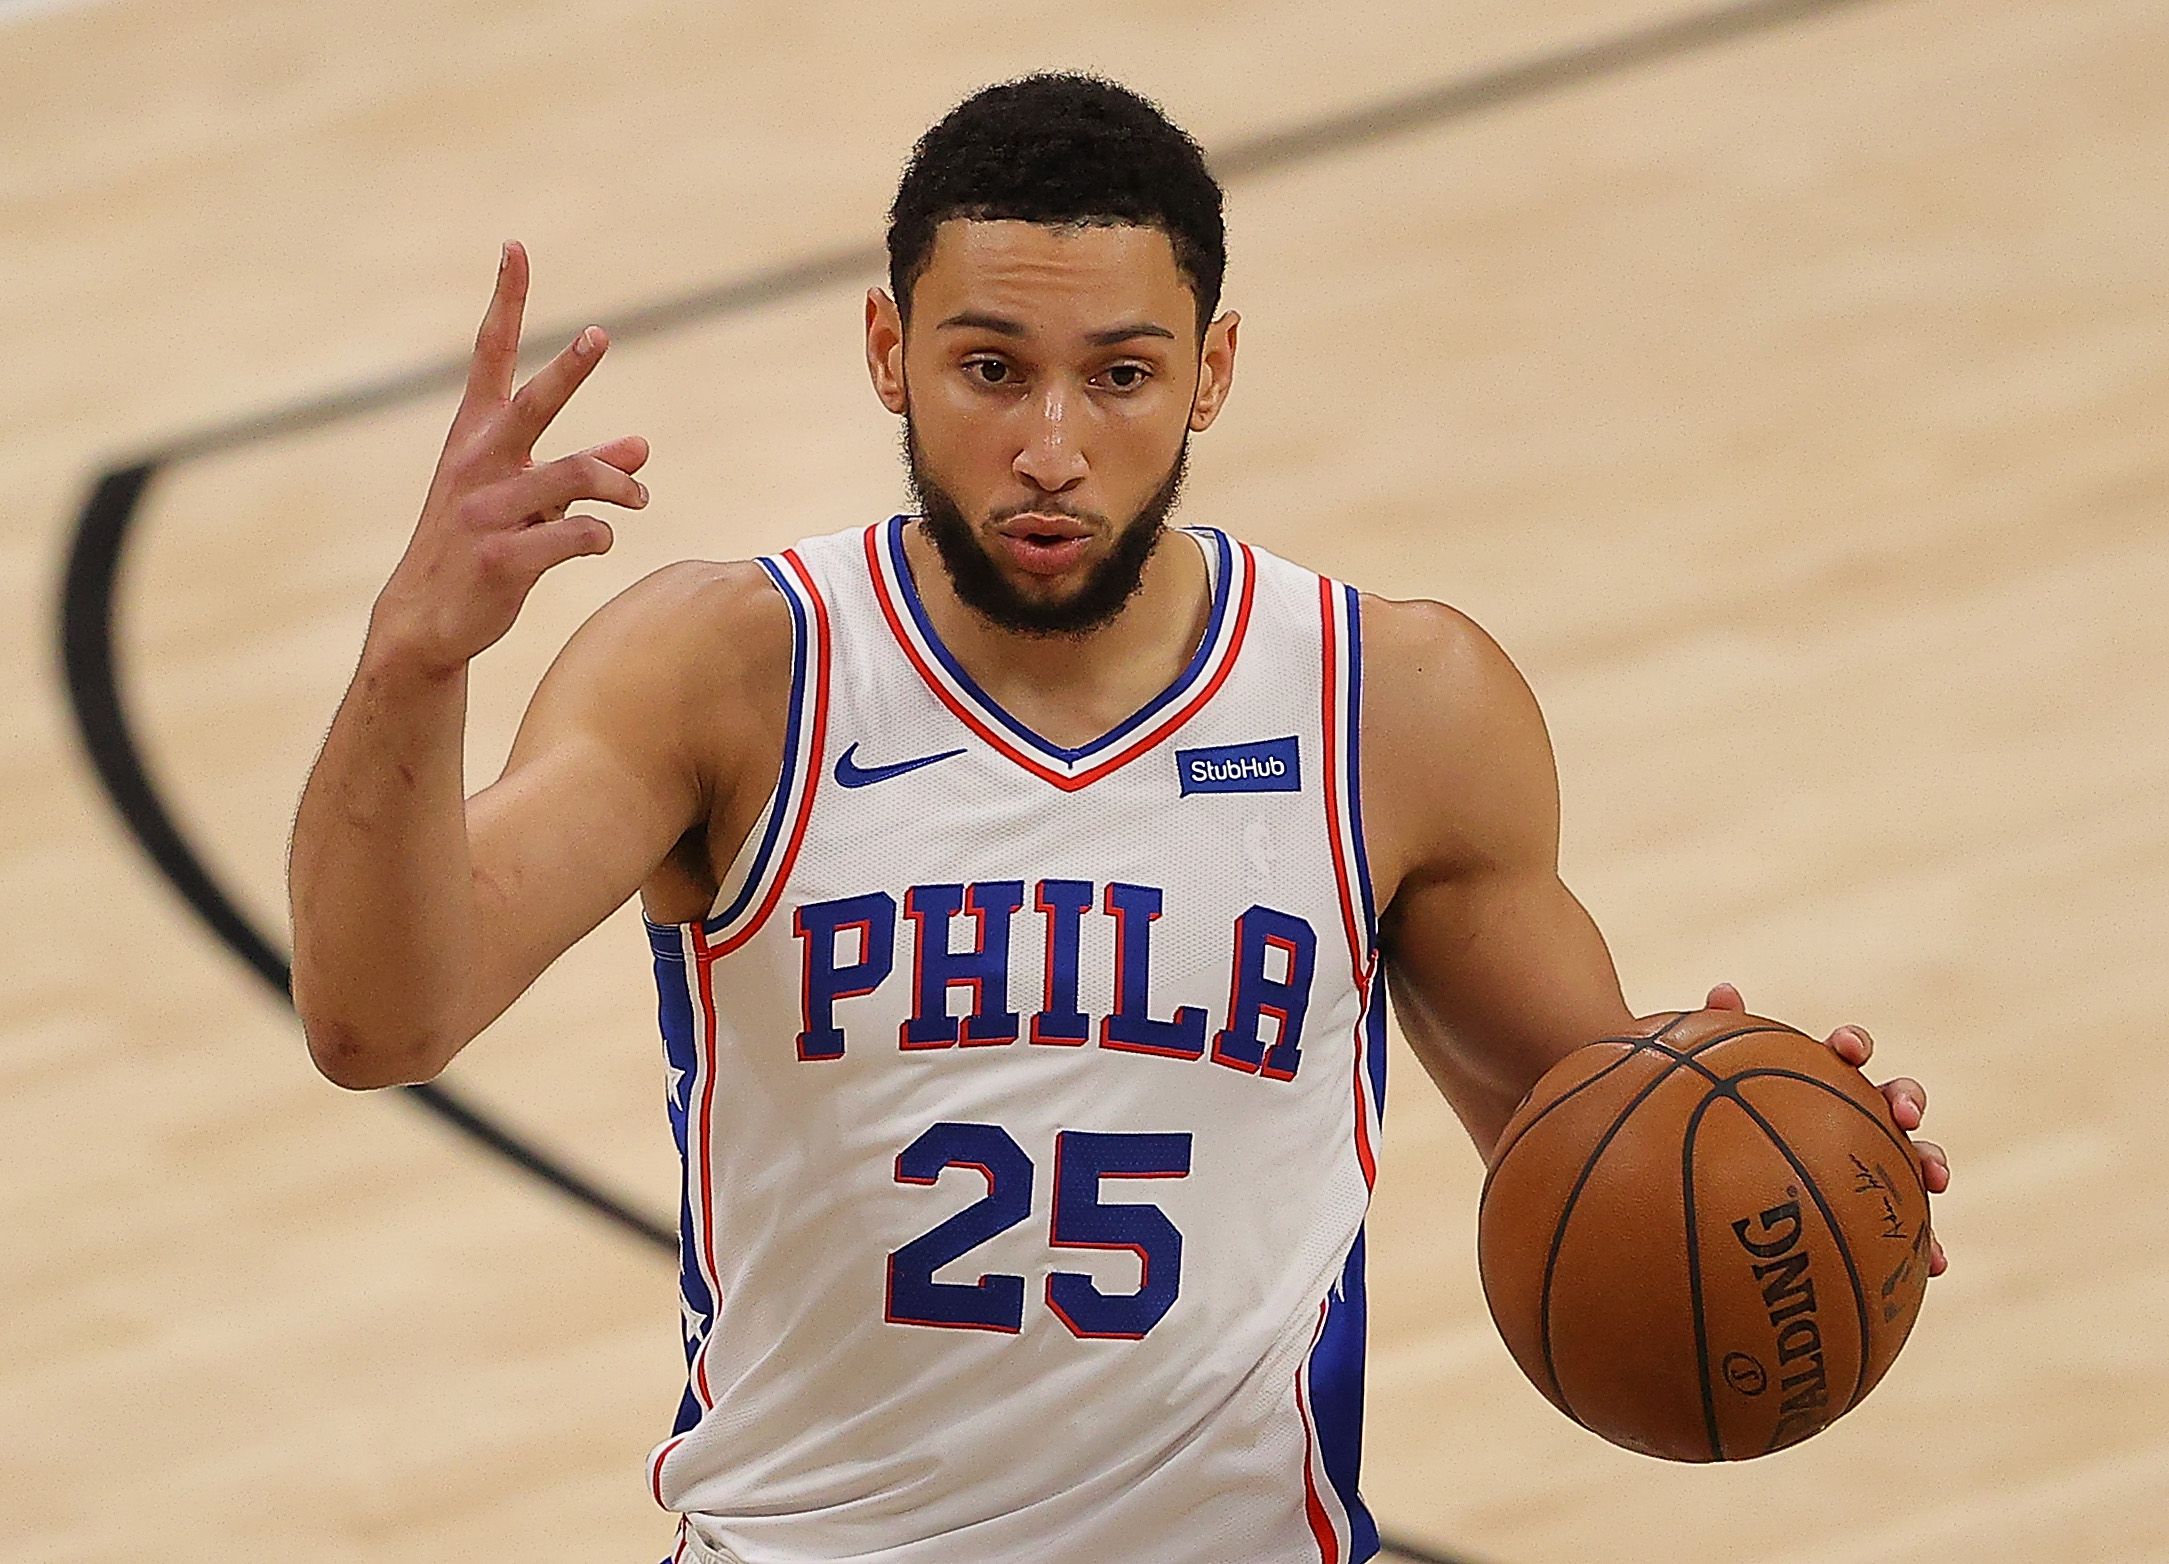 Ben Simmons gives signal for a specific play